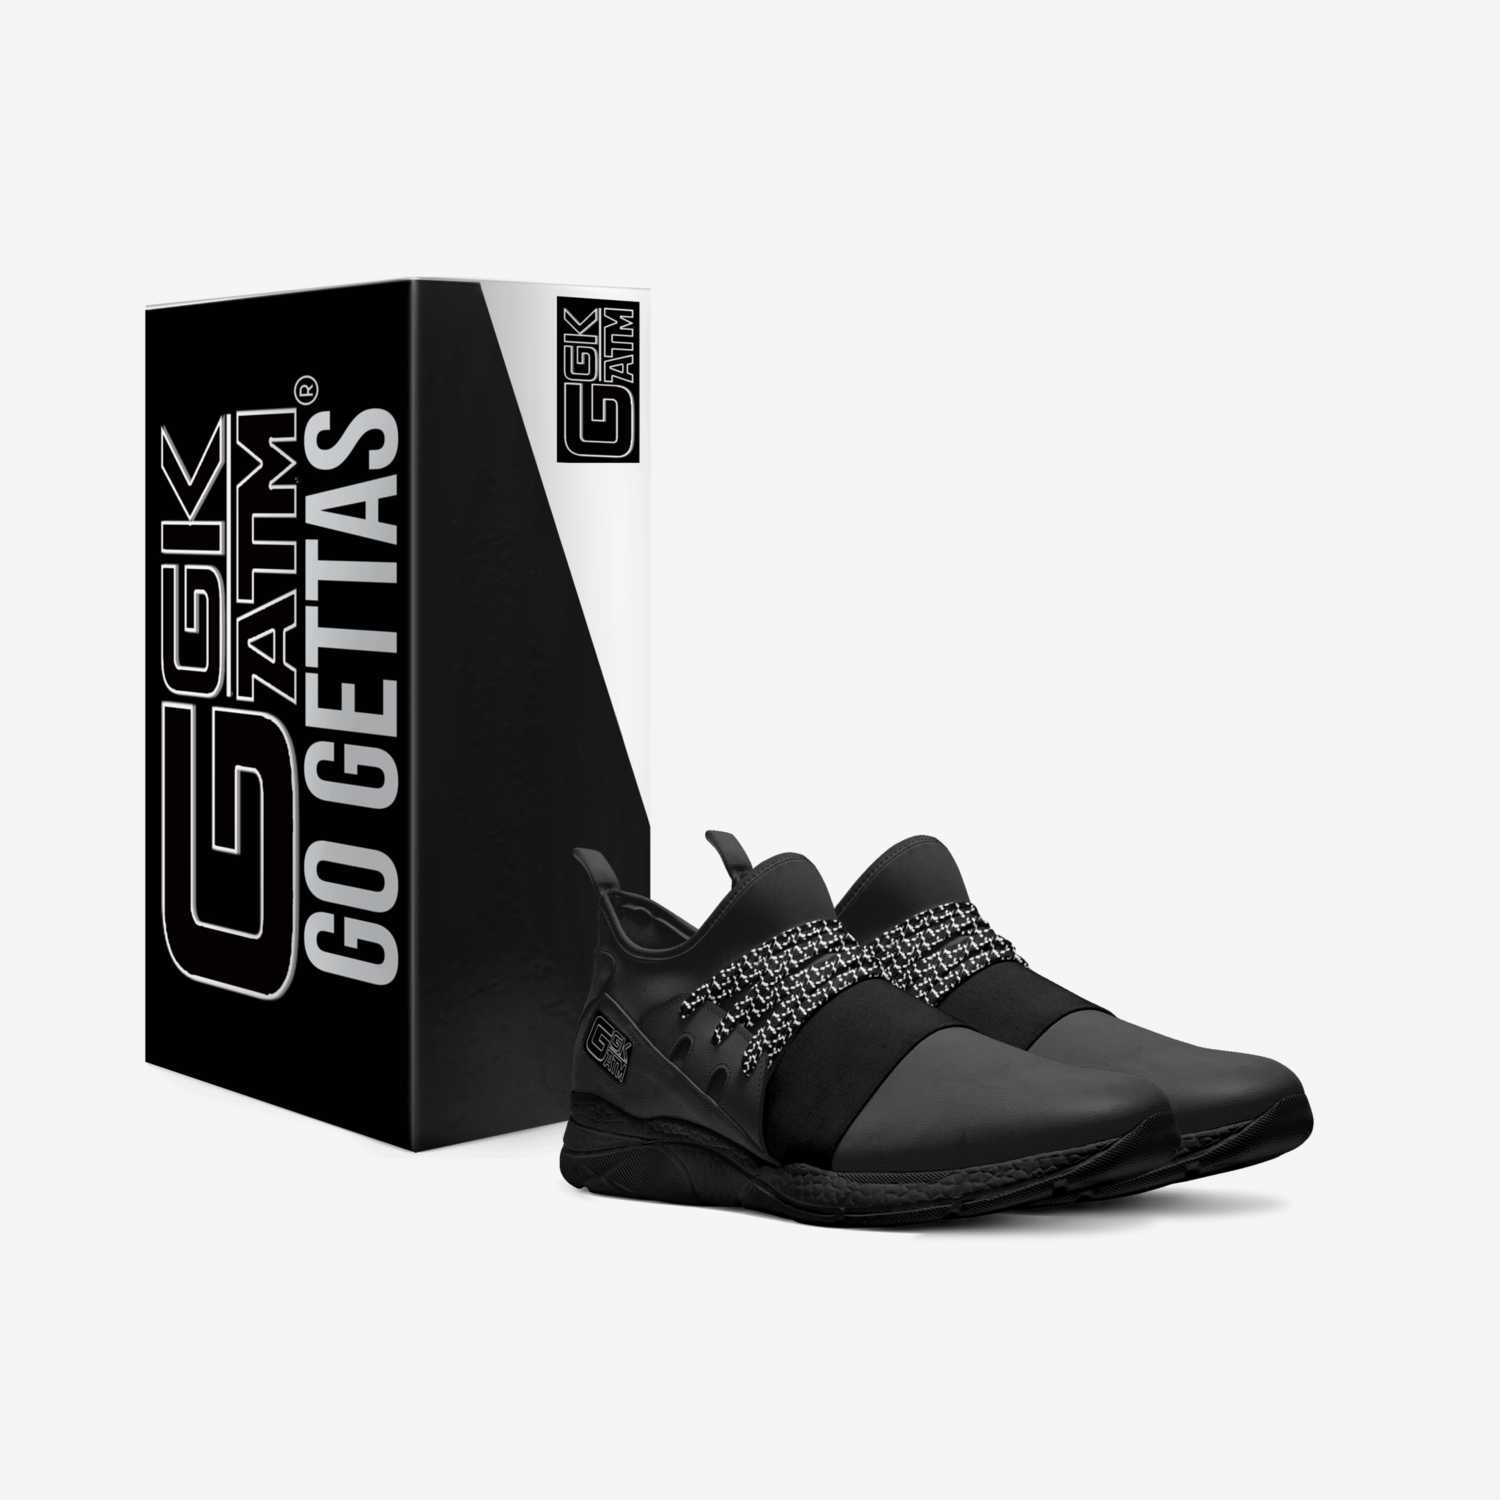 GGKATM GO GETTAS 3 custom made in Italy shoes by Ggkatm Clothing | Box view